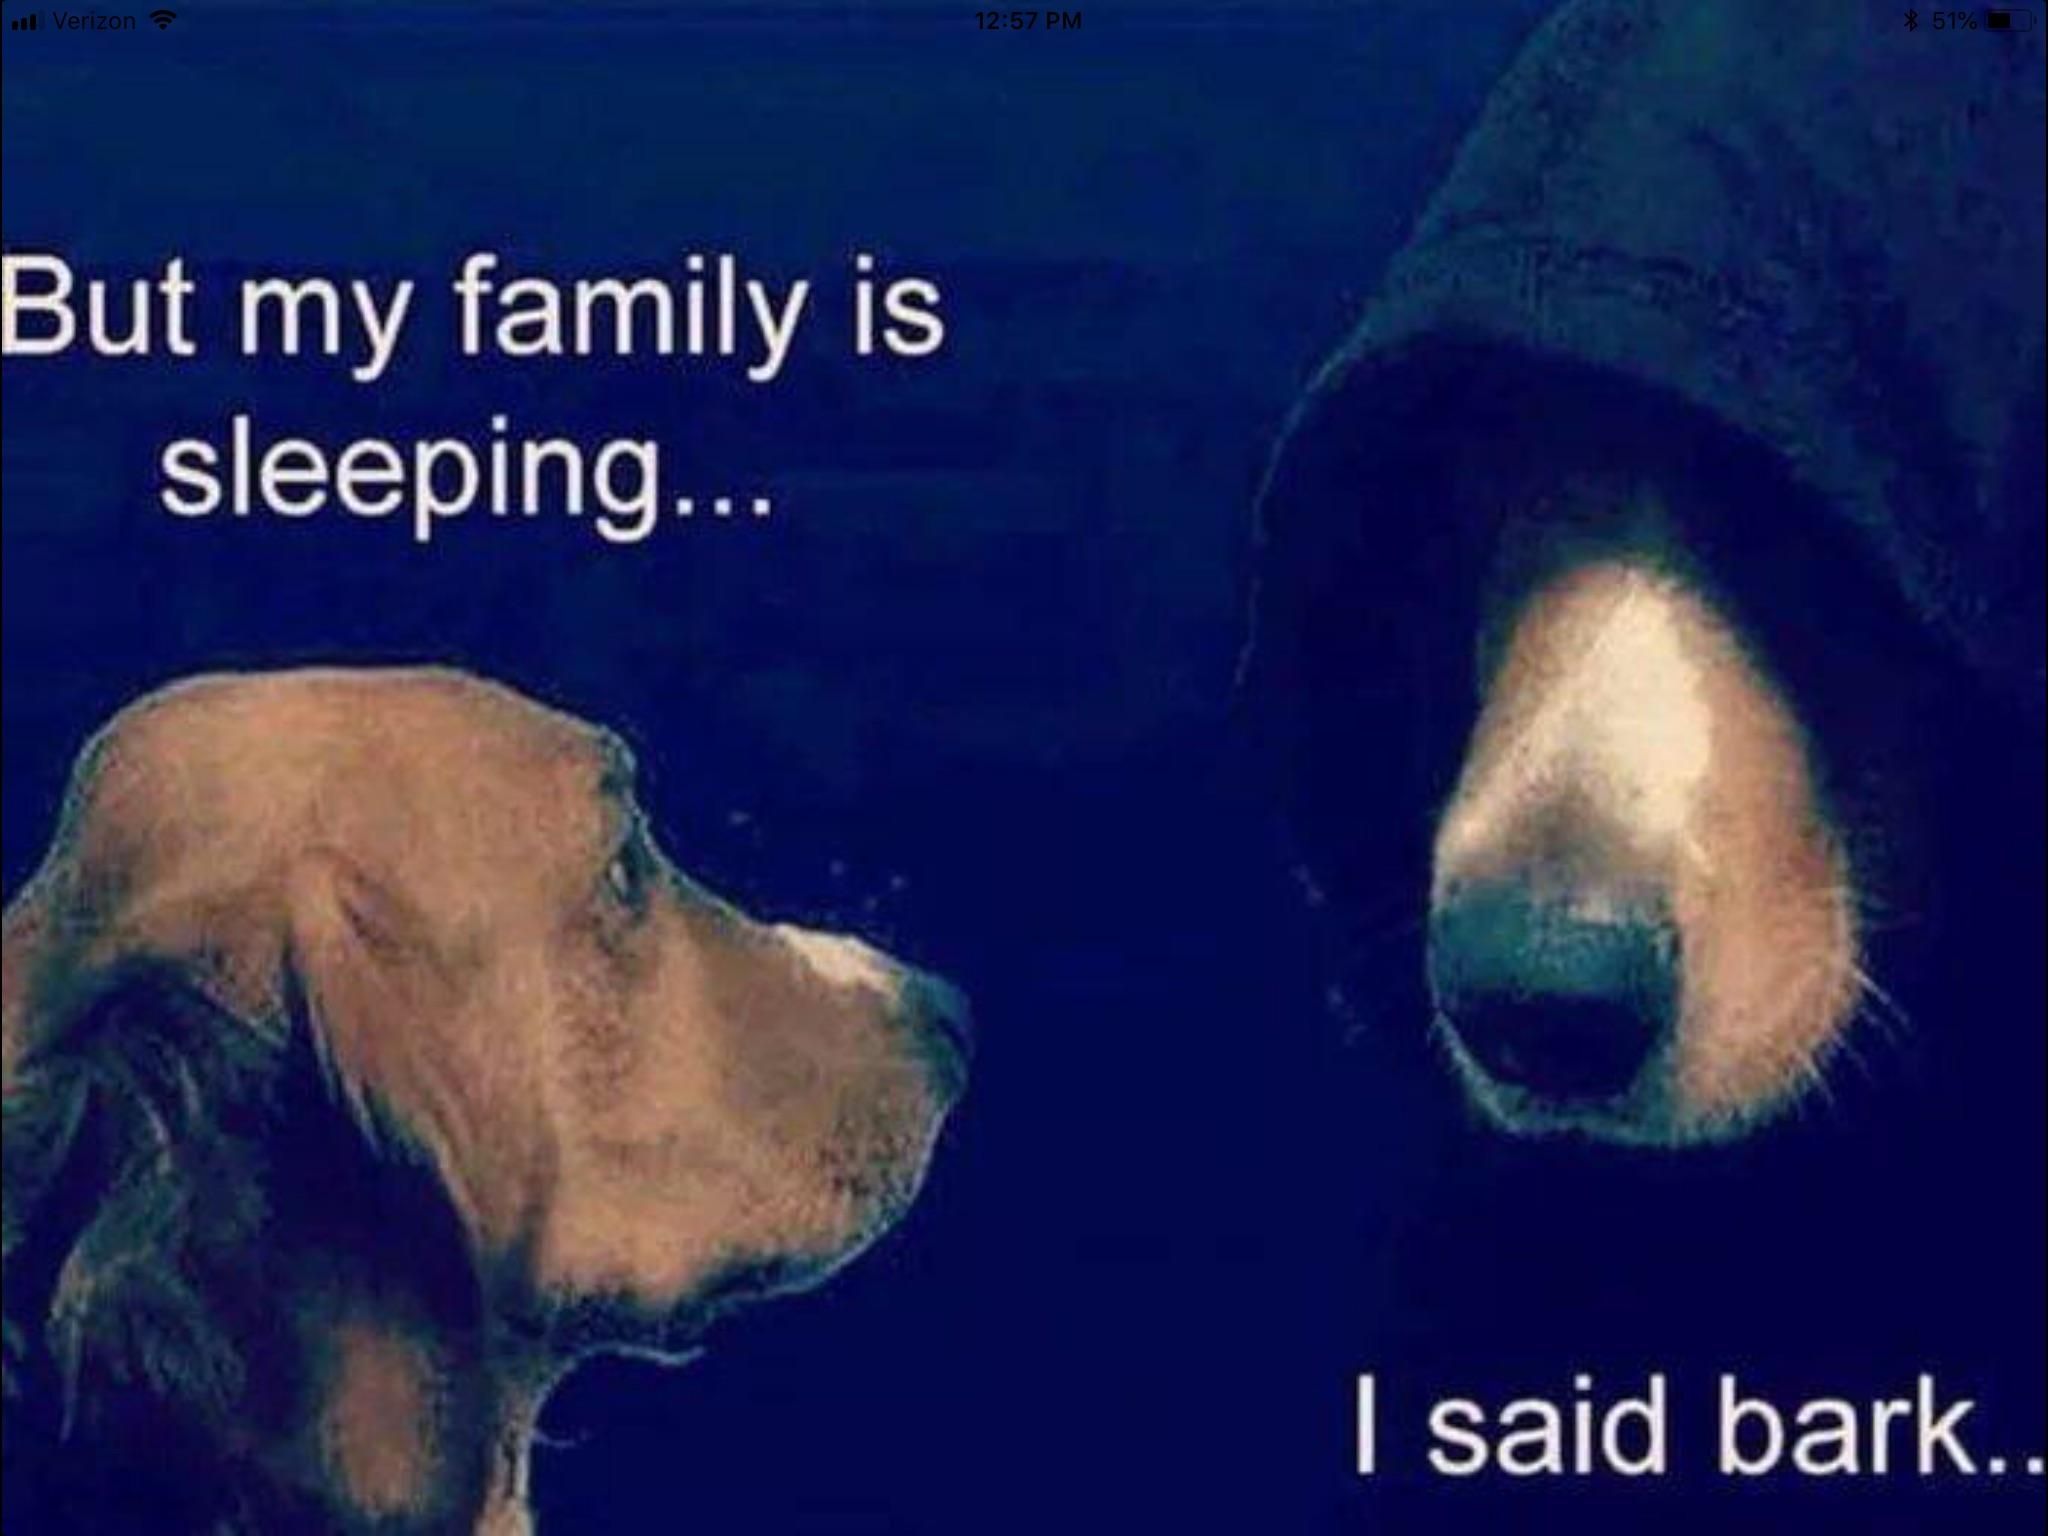 Join the Bark side........